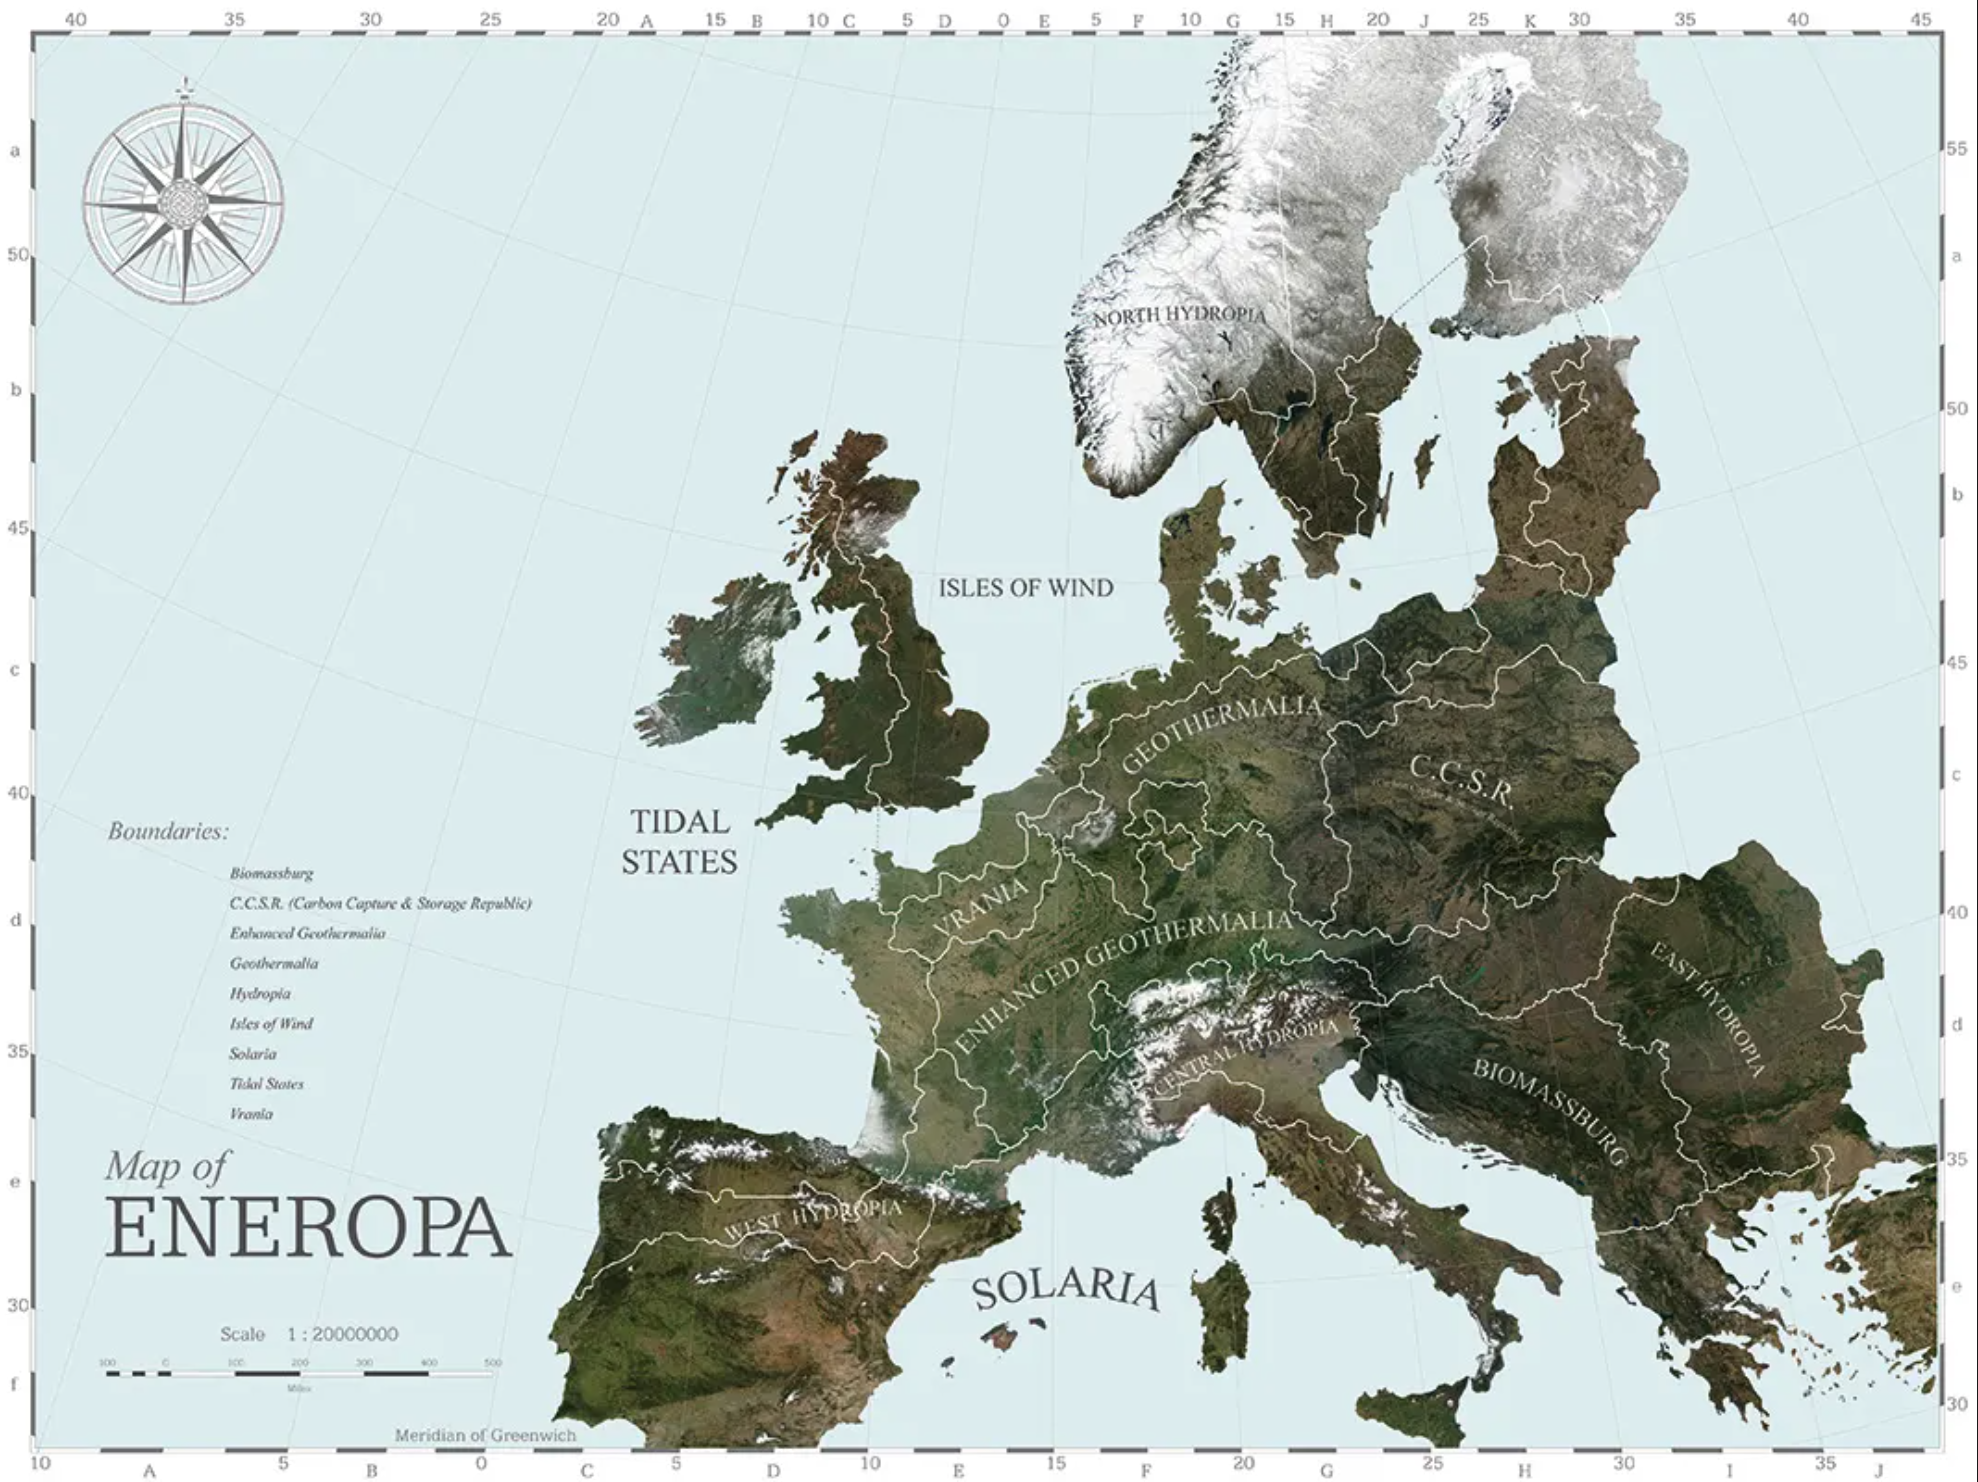 A detailed fictional map titled "map of eneropa," depicting various labeled regions and a scale, with topographical features and a compass rose.